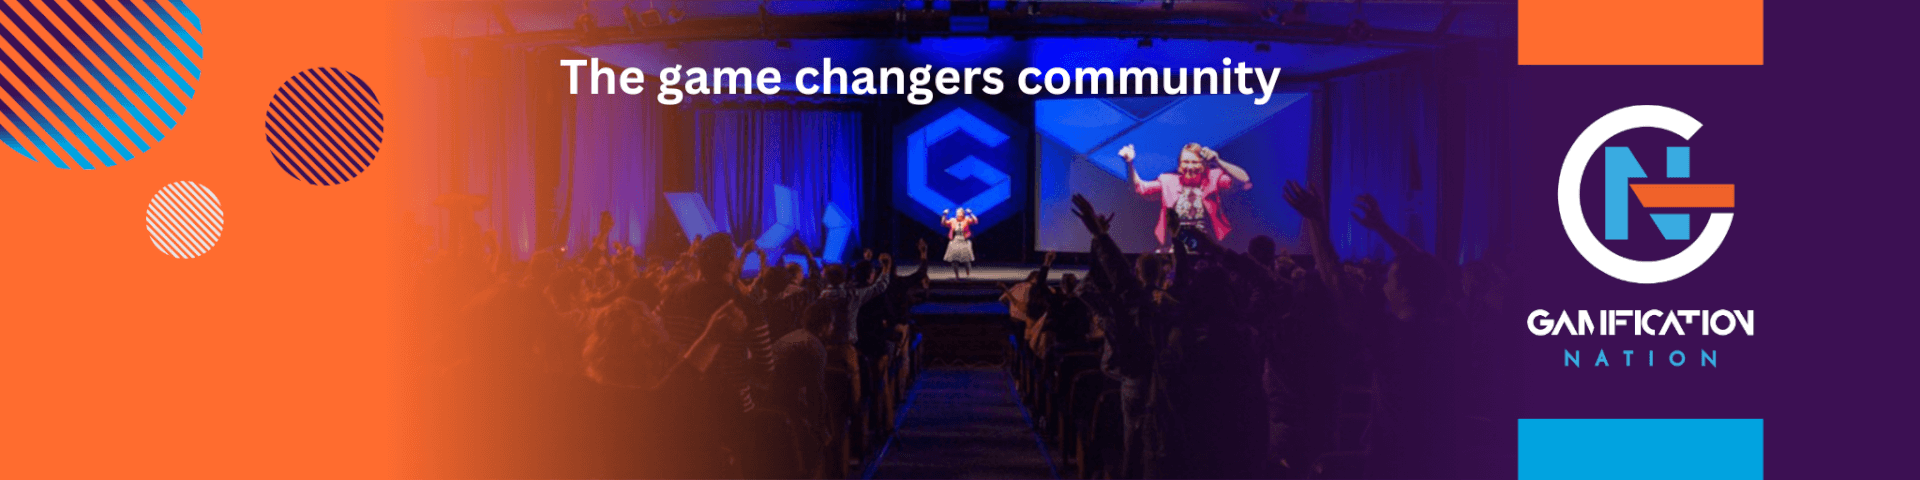 The game changers community by Gamification Nation